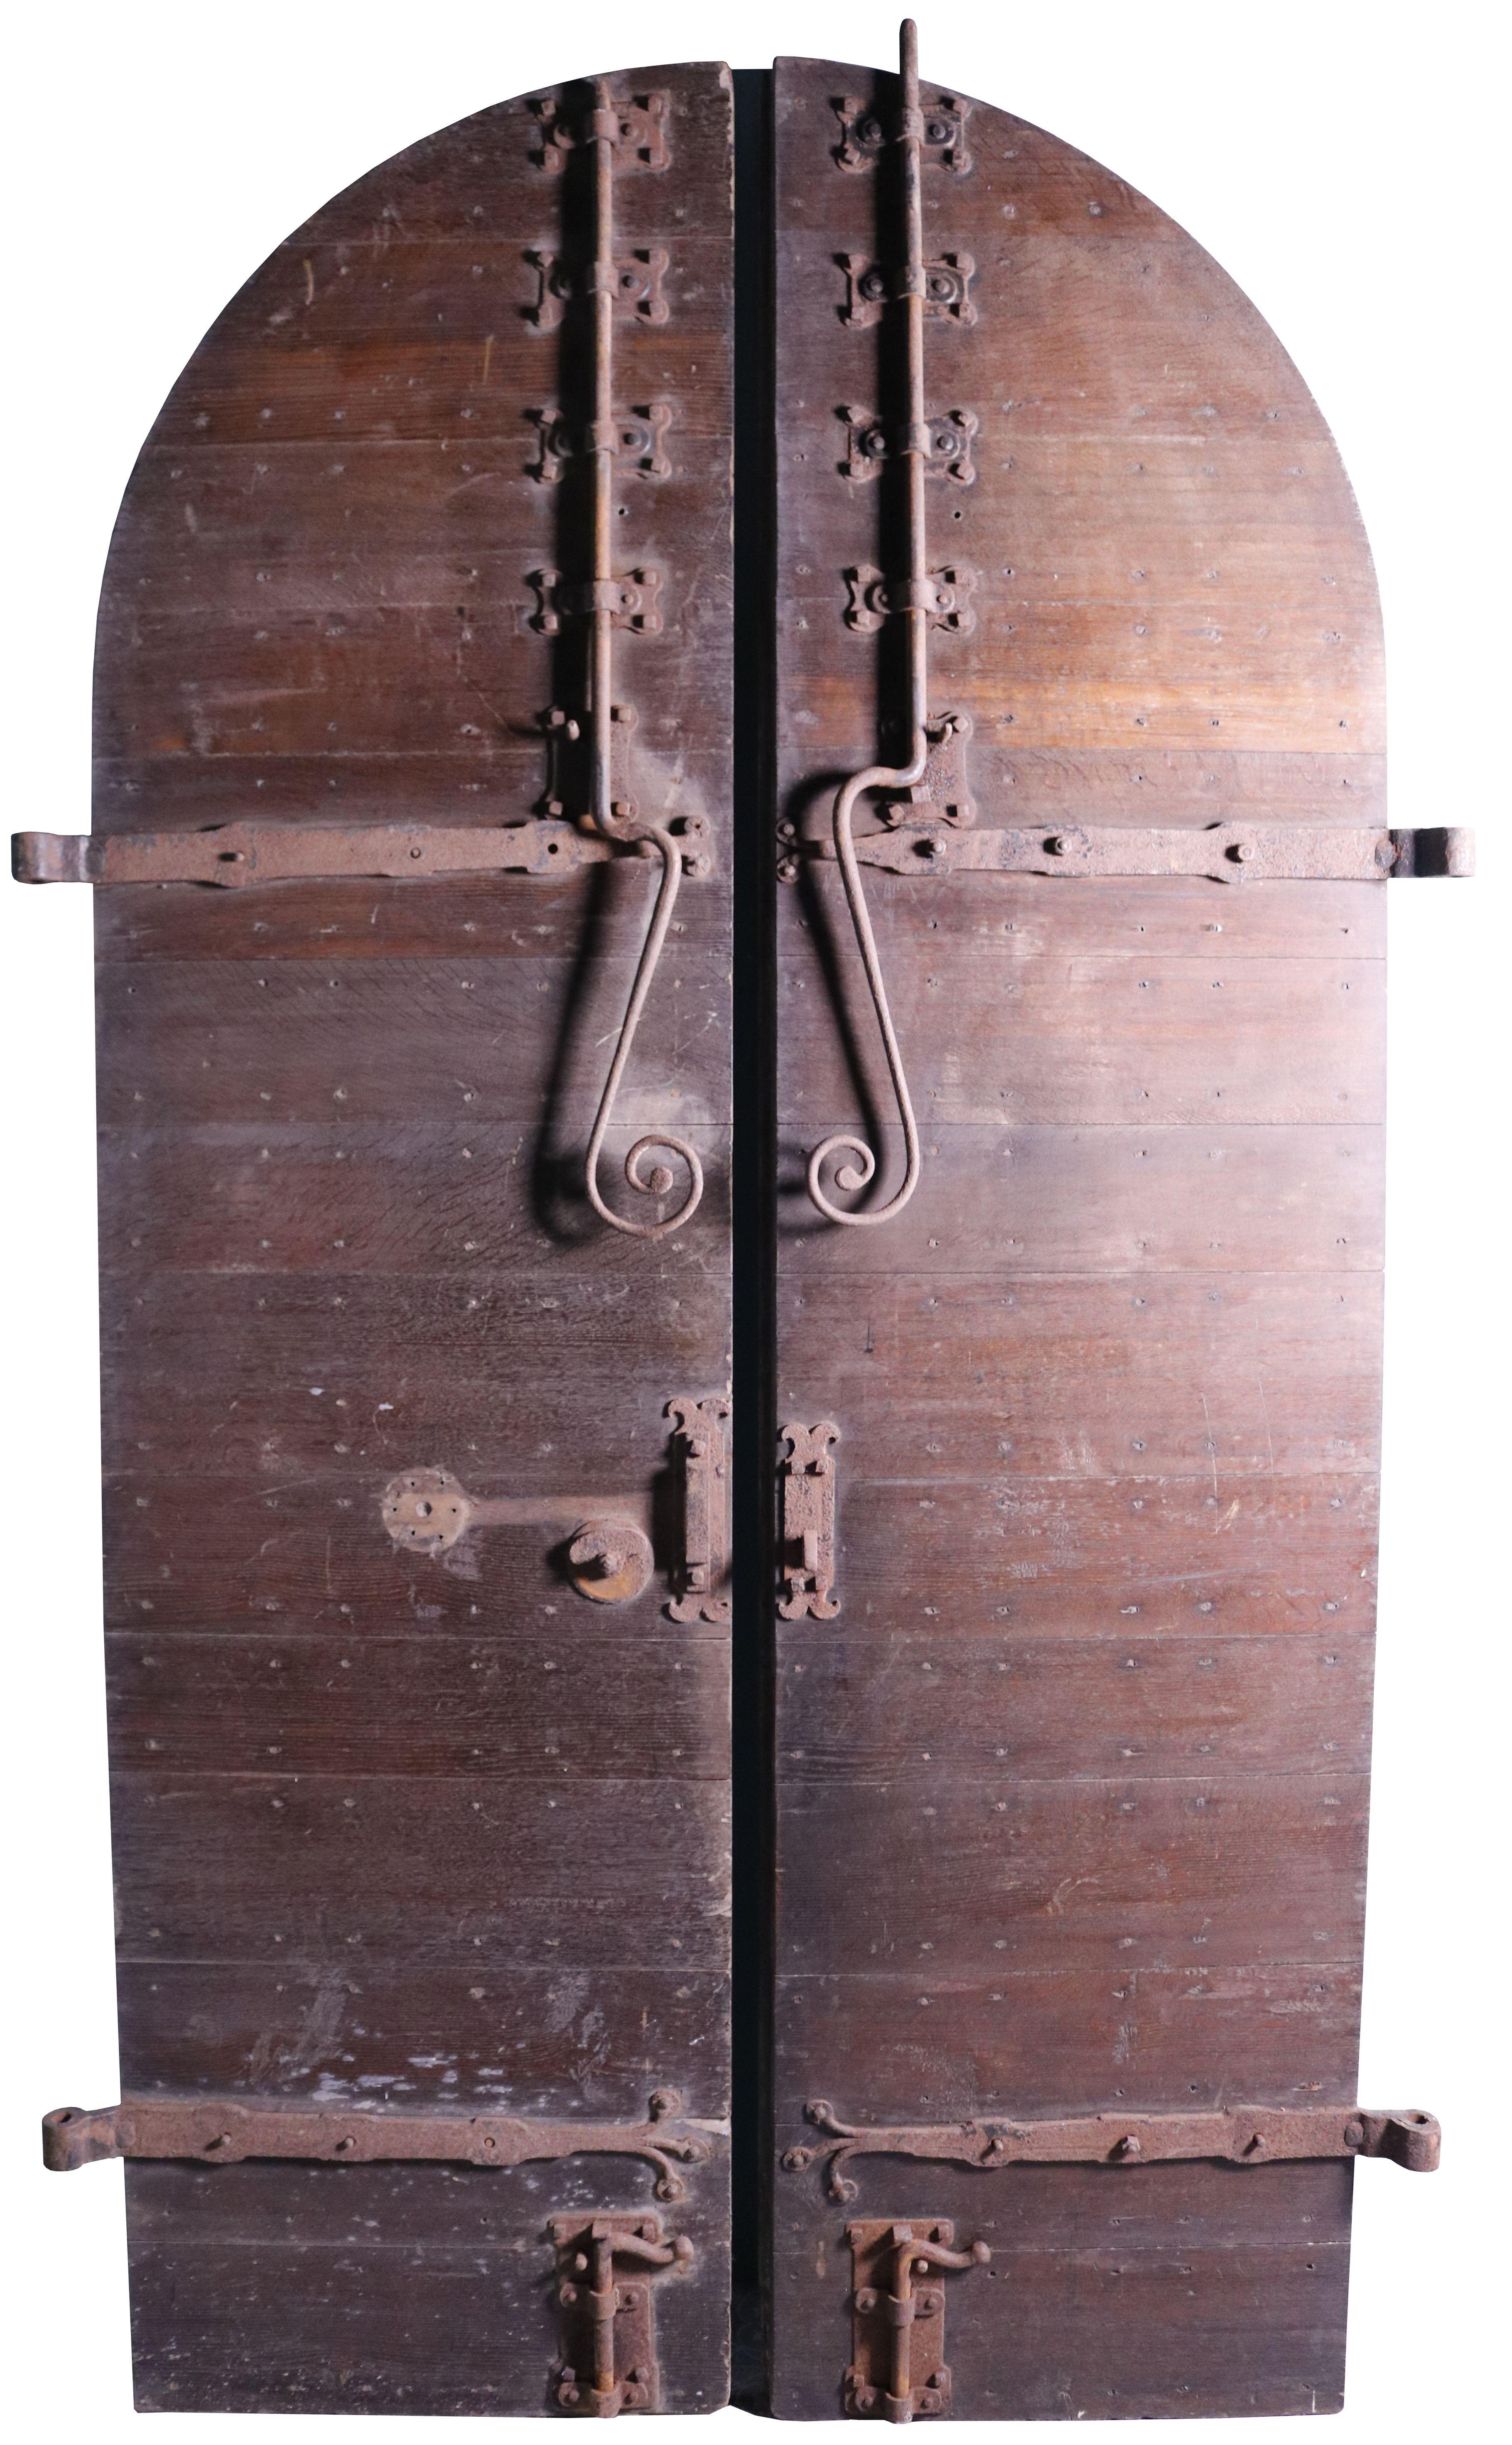 English Medieval Style Church doors. A set of large arched antique doors with original hardware and a weathered time worn appearance. These wonderful studded oak doors feature fantastic blacksmith made wrought iron hinges and door bolts. They are of